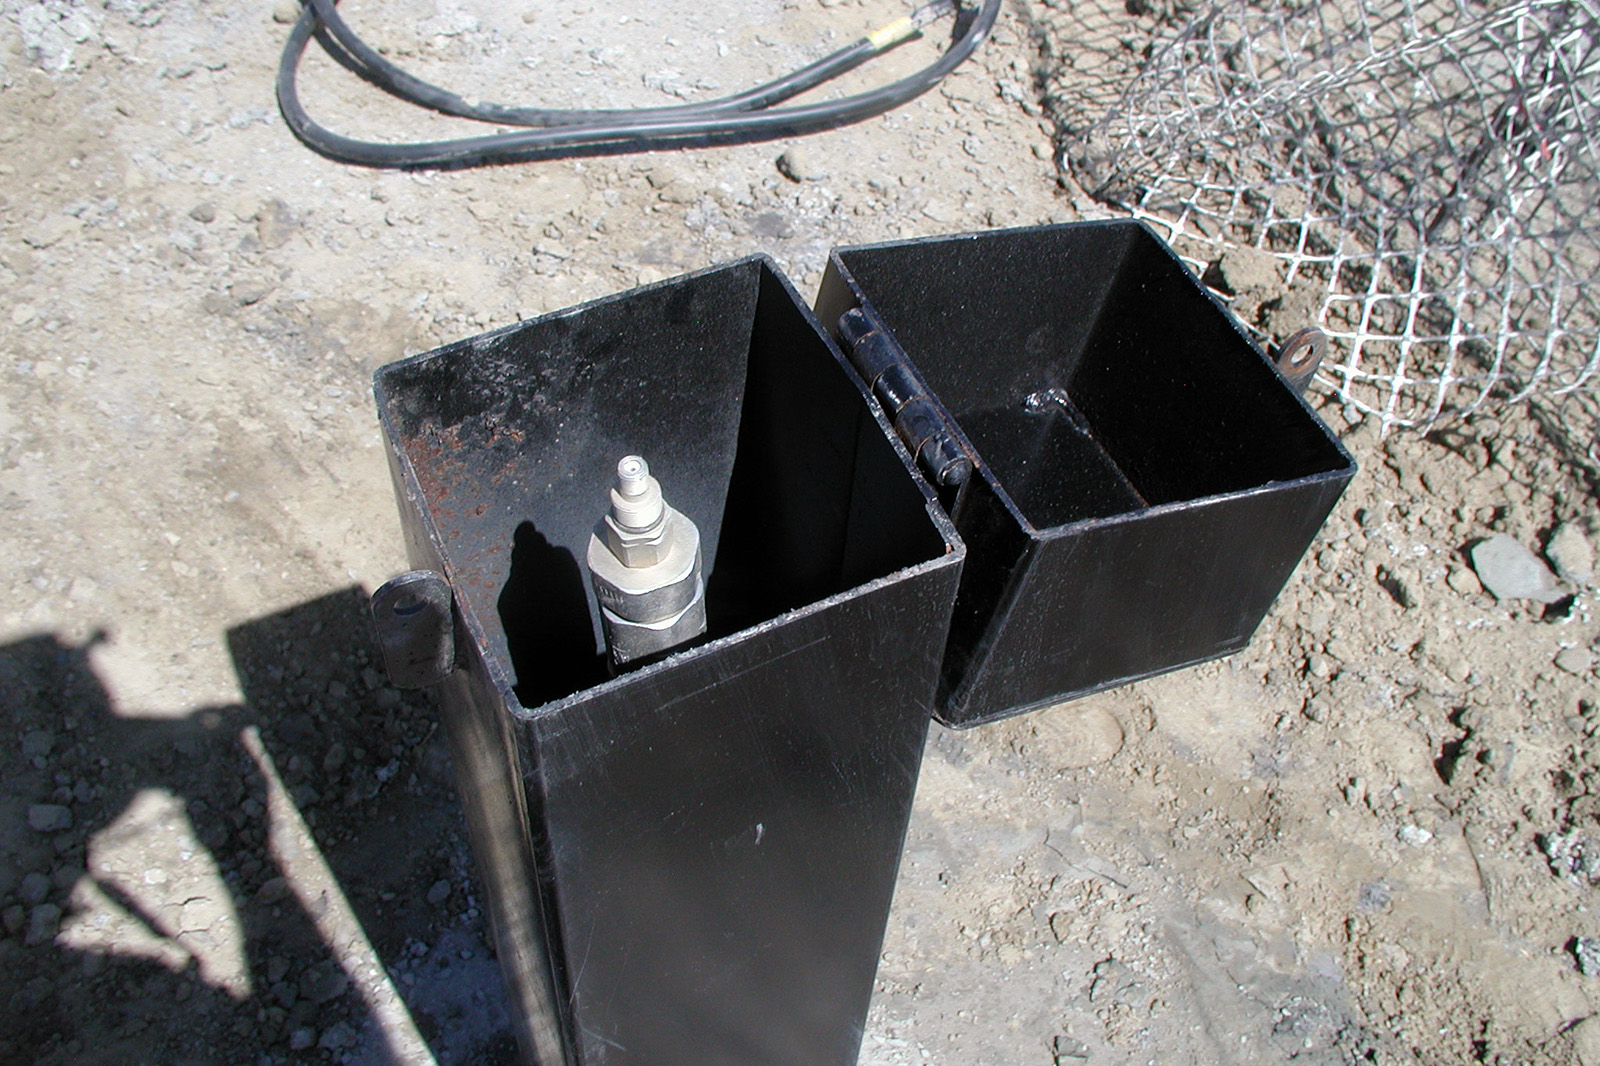 TDR cable hole collar completion for subsidence and longwall cave monitoring,  BHP San Juan Coal Mine, Farmington, New Mexico